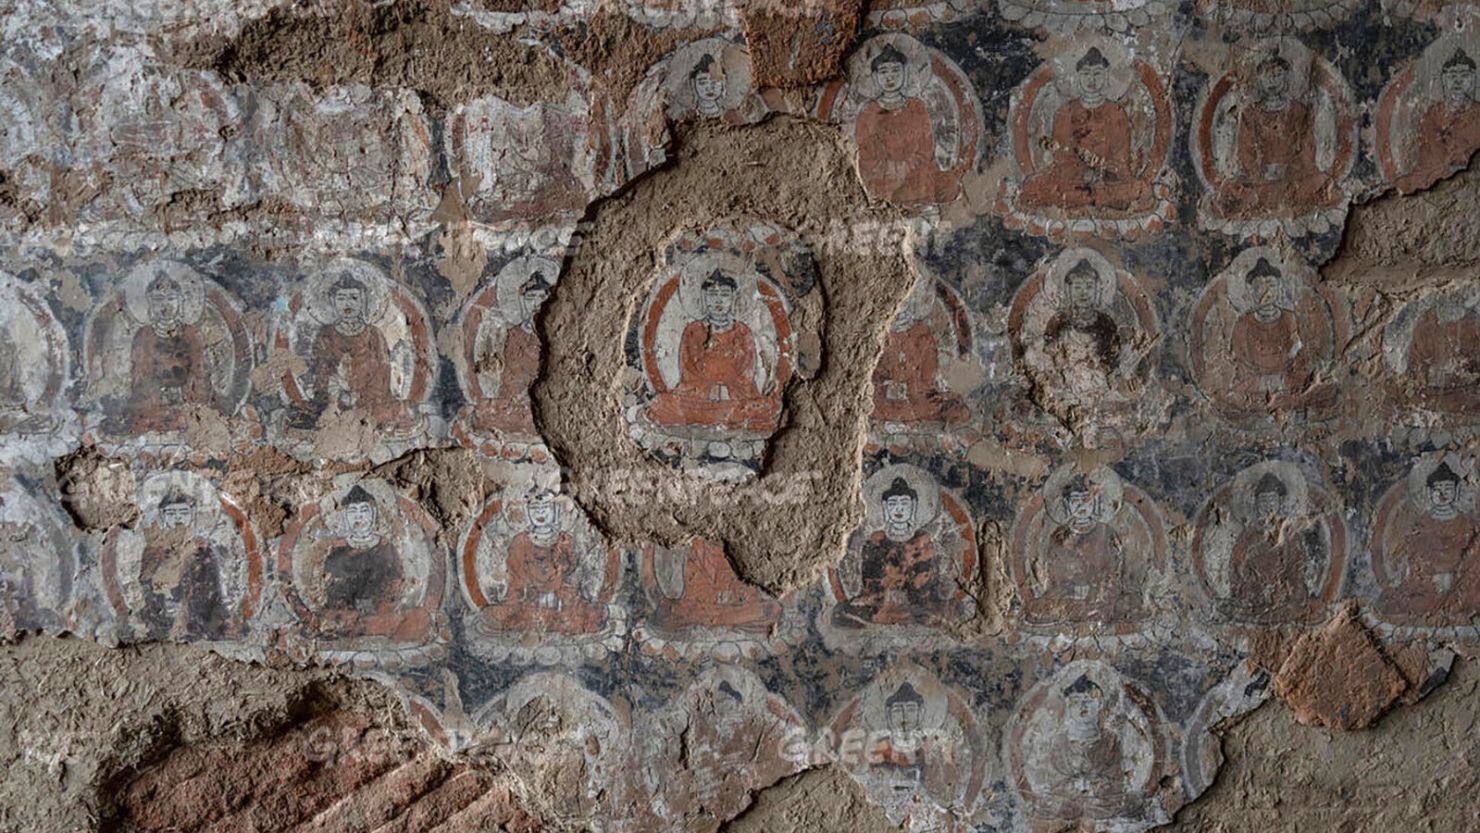 This research material provided by Greenpeace shows crumbling and detachment on a mural in the Eastern Cave of the Jinta Temple. 